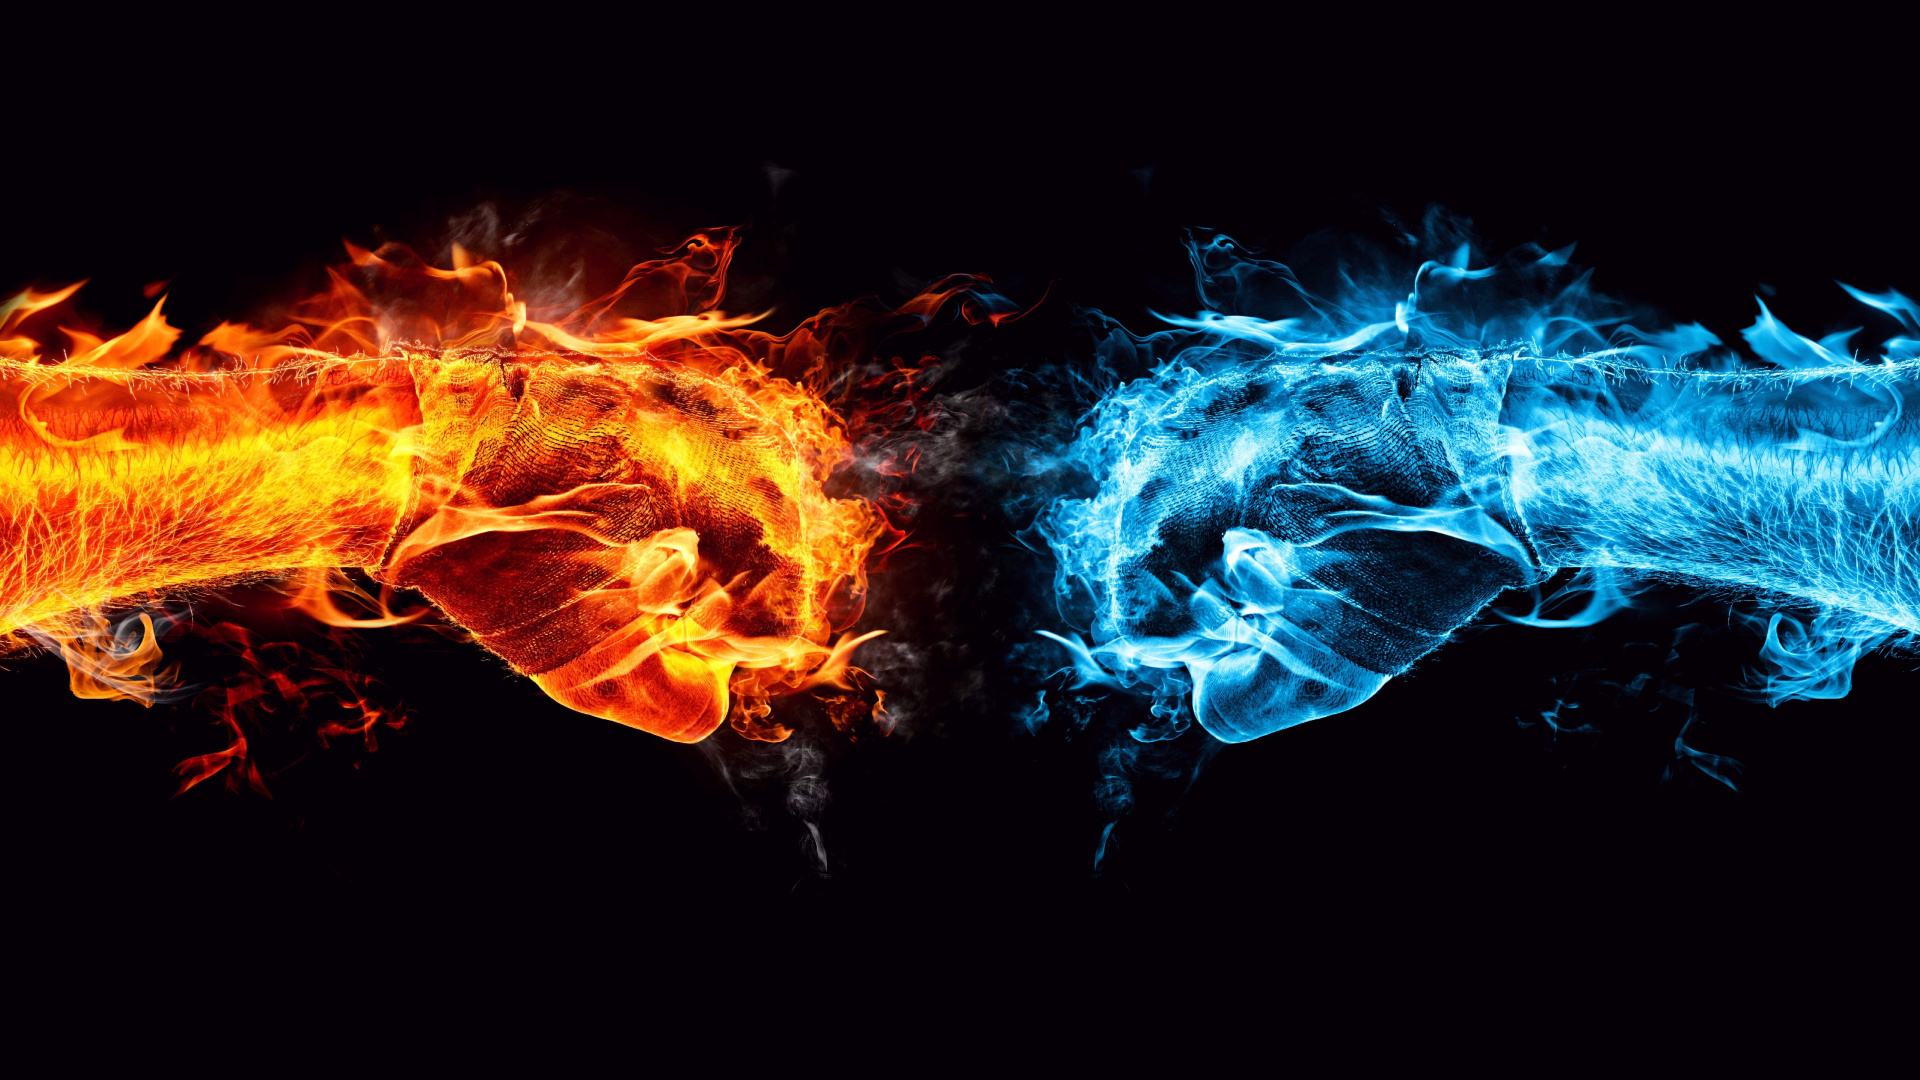 Blue and Orange Flame Illustration. Wallpaper in 1920x1080 Resolution